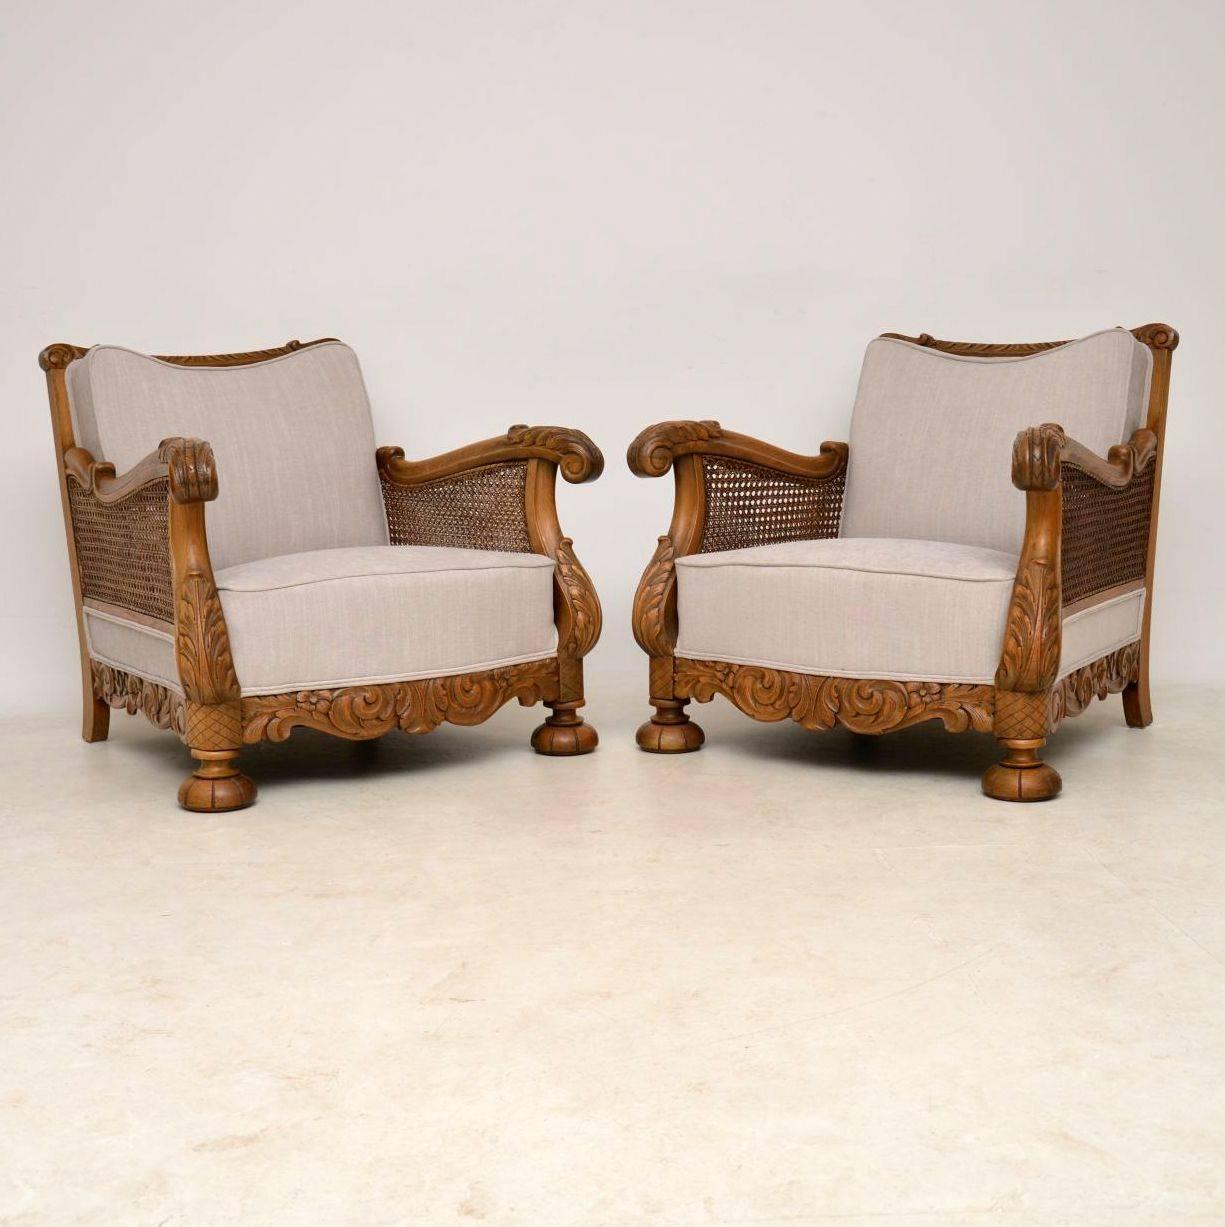 Very impressive pair of antique Swedish bergère armchairs with superbly carved oak frames, cane sides and of generous proportions. They are in excellent condition, having just been polished and re-upholstered and they have just come over from